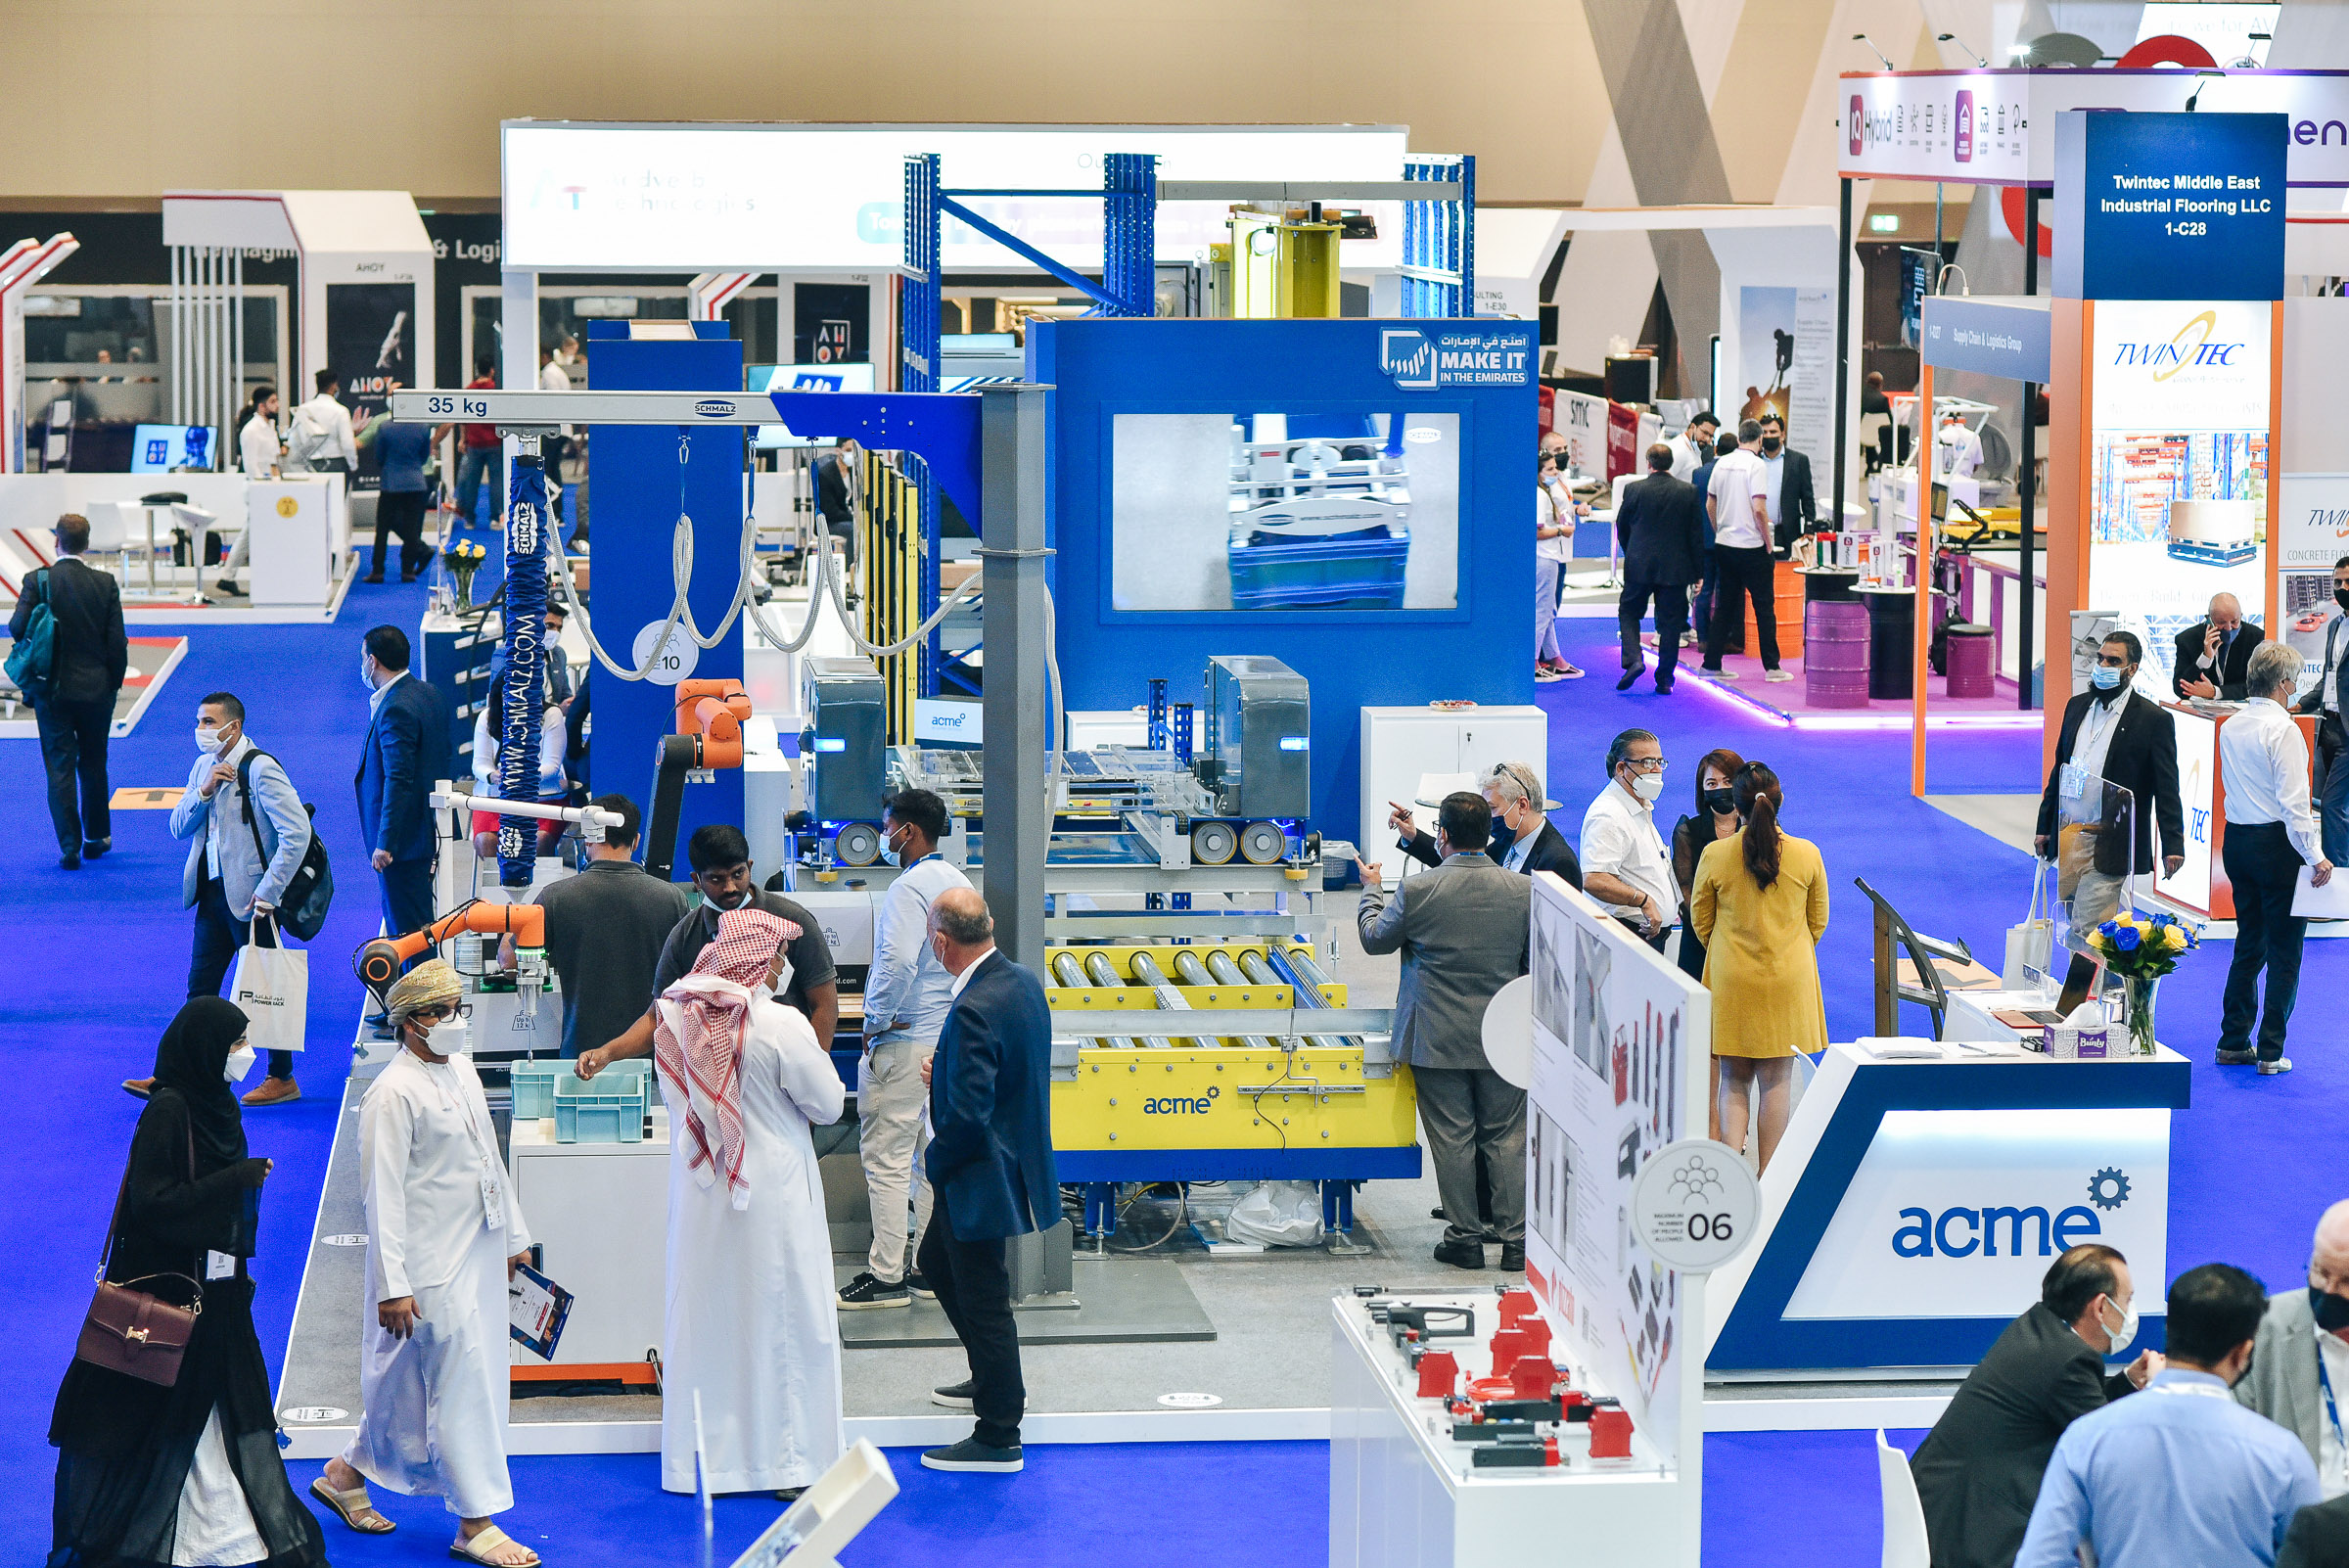 Materials Handling Middle East - About the show